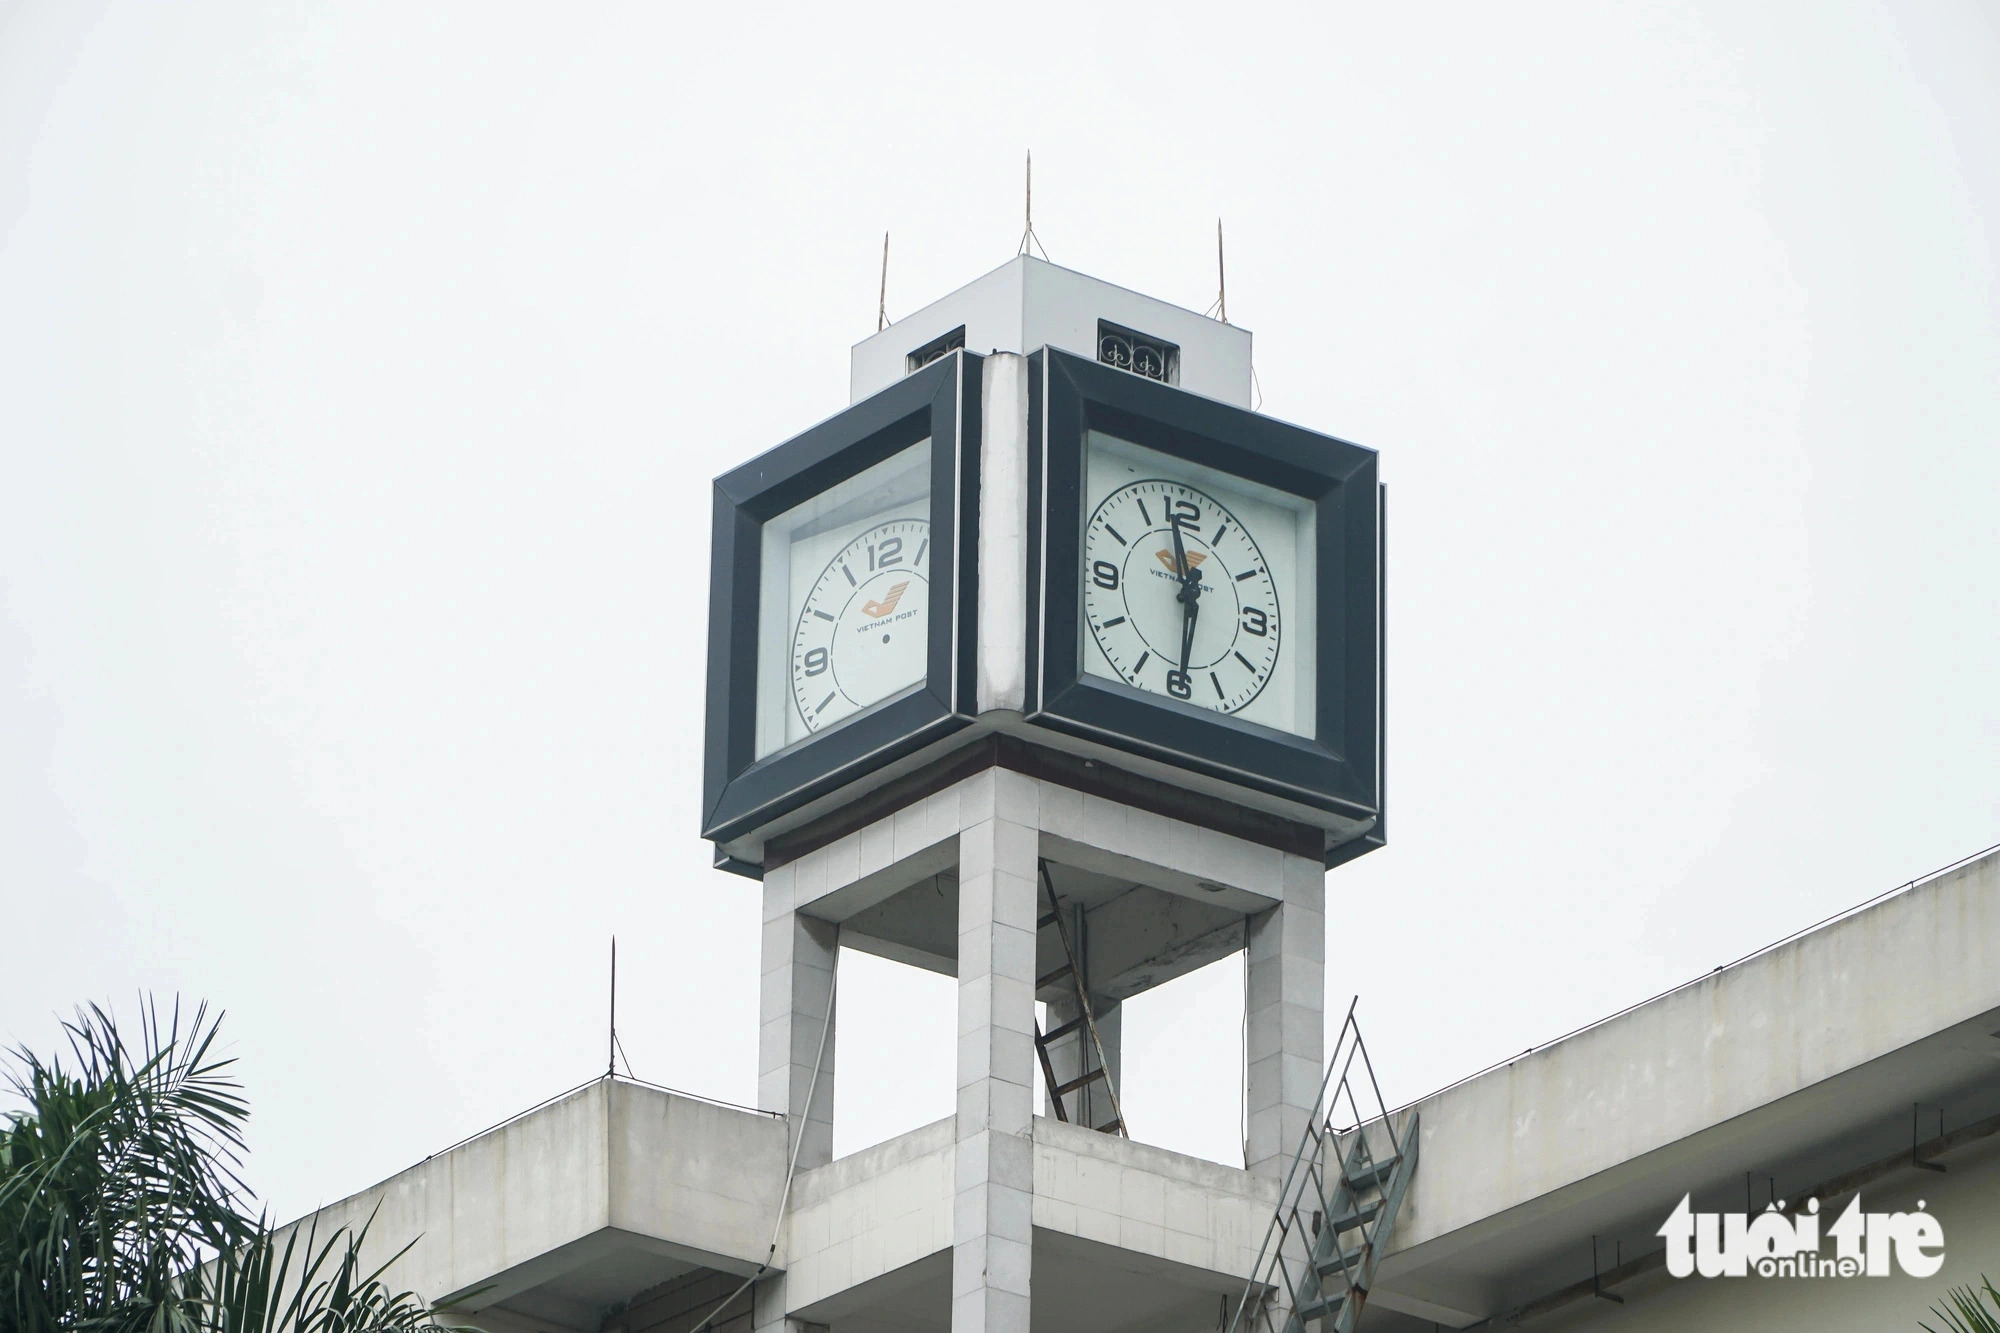 Dead four-faced street clock left neglected for years in Hanoi